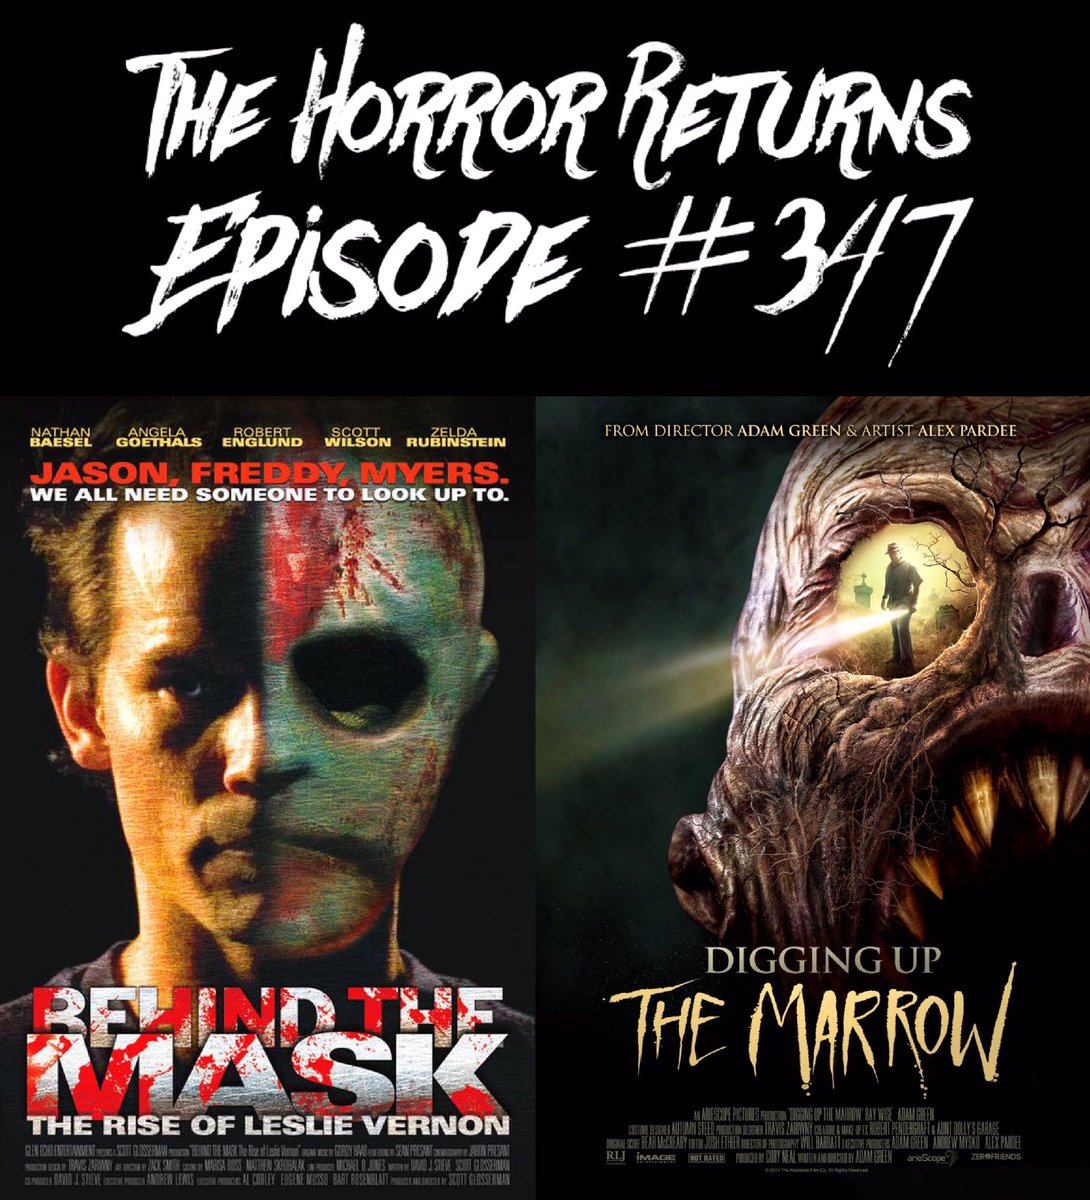 #TheHorrorReturns - Ep. #347: #BehindTheMask: #TheRiseOfLeslieVernon (2006) & #DiggingUpTheMarrow (2014) Is Now Available At thehorrorreturns.com. #THRPodcastNetwork #HorrorFamily #HorrorCommunity #Podcast #Podcasting #PodLife #PodernFamily #PodcastHQ #PodNation #MutantFam